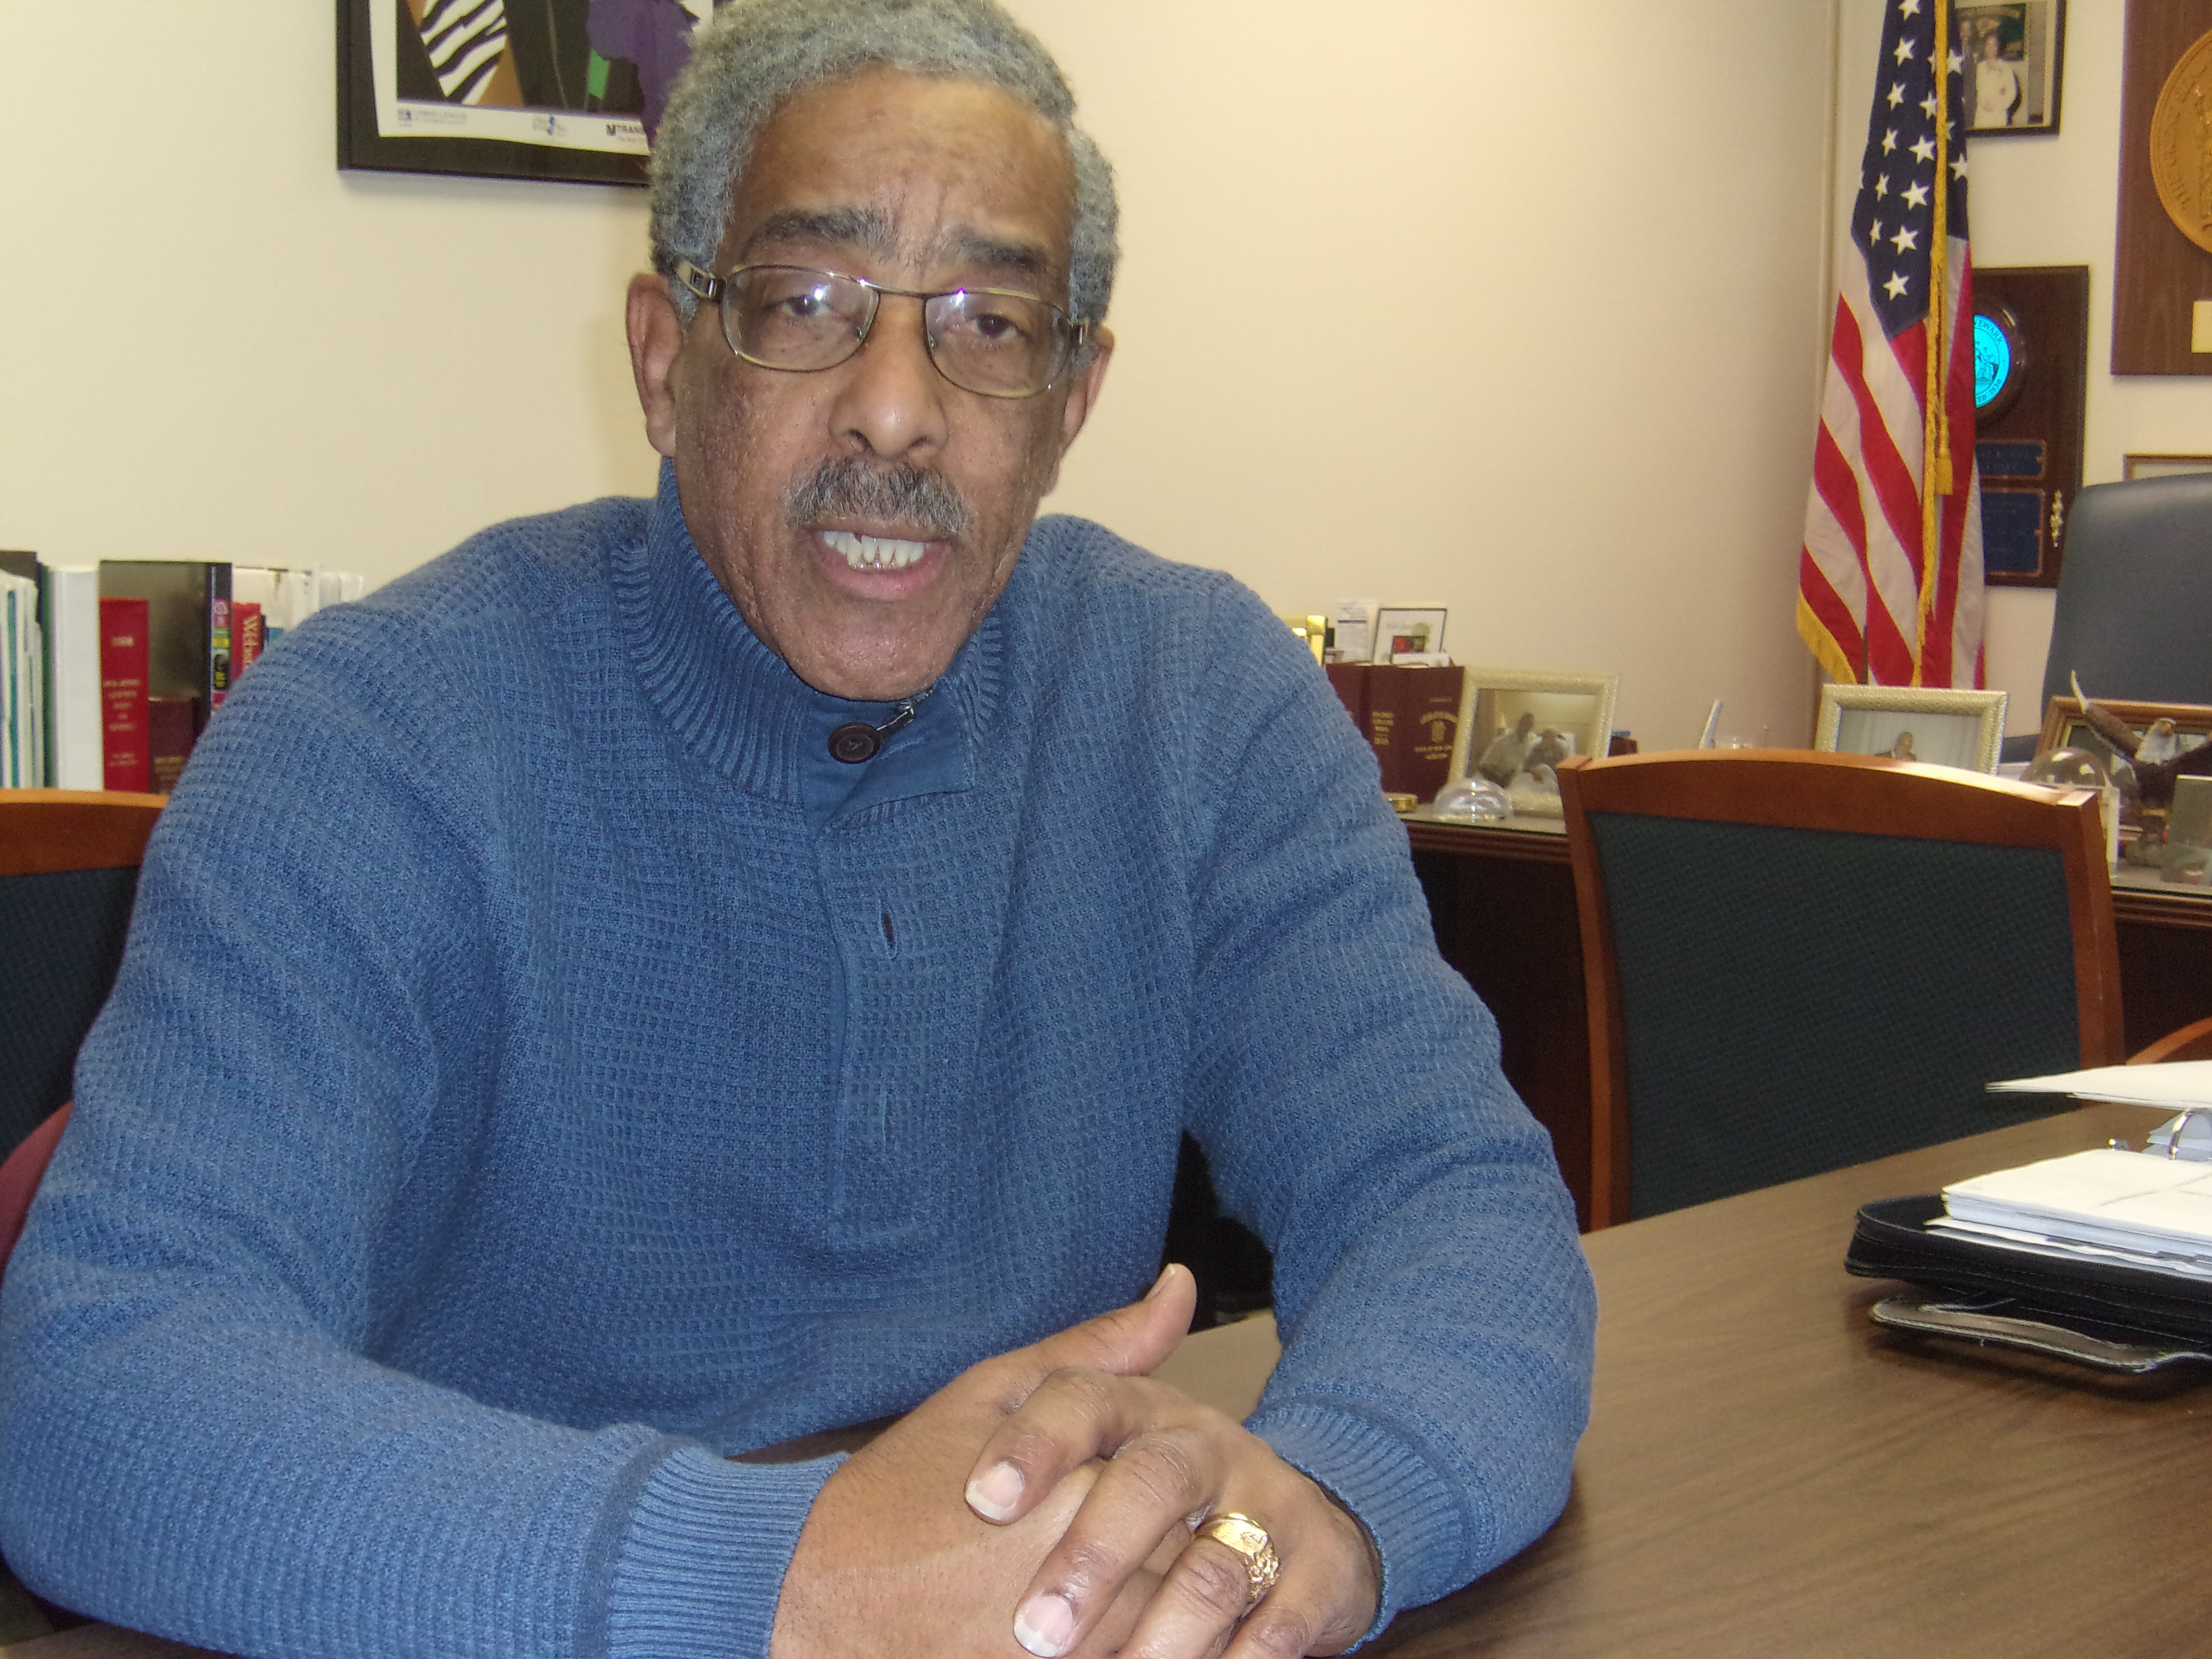 Senator Ronald L. Rice issued a statement regarding the efforts underway in Atlantic City to put a hired manager in control of government, saying he supports the current form of government in place and that outside intervention does not prevent mismanagement.